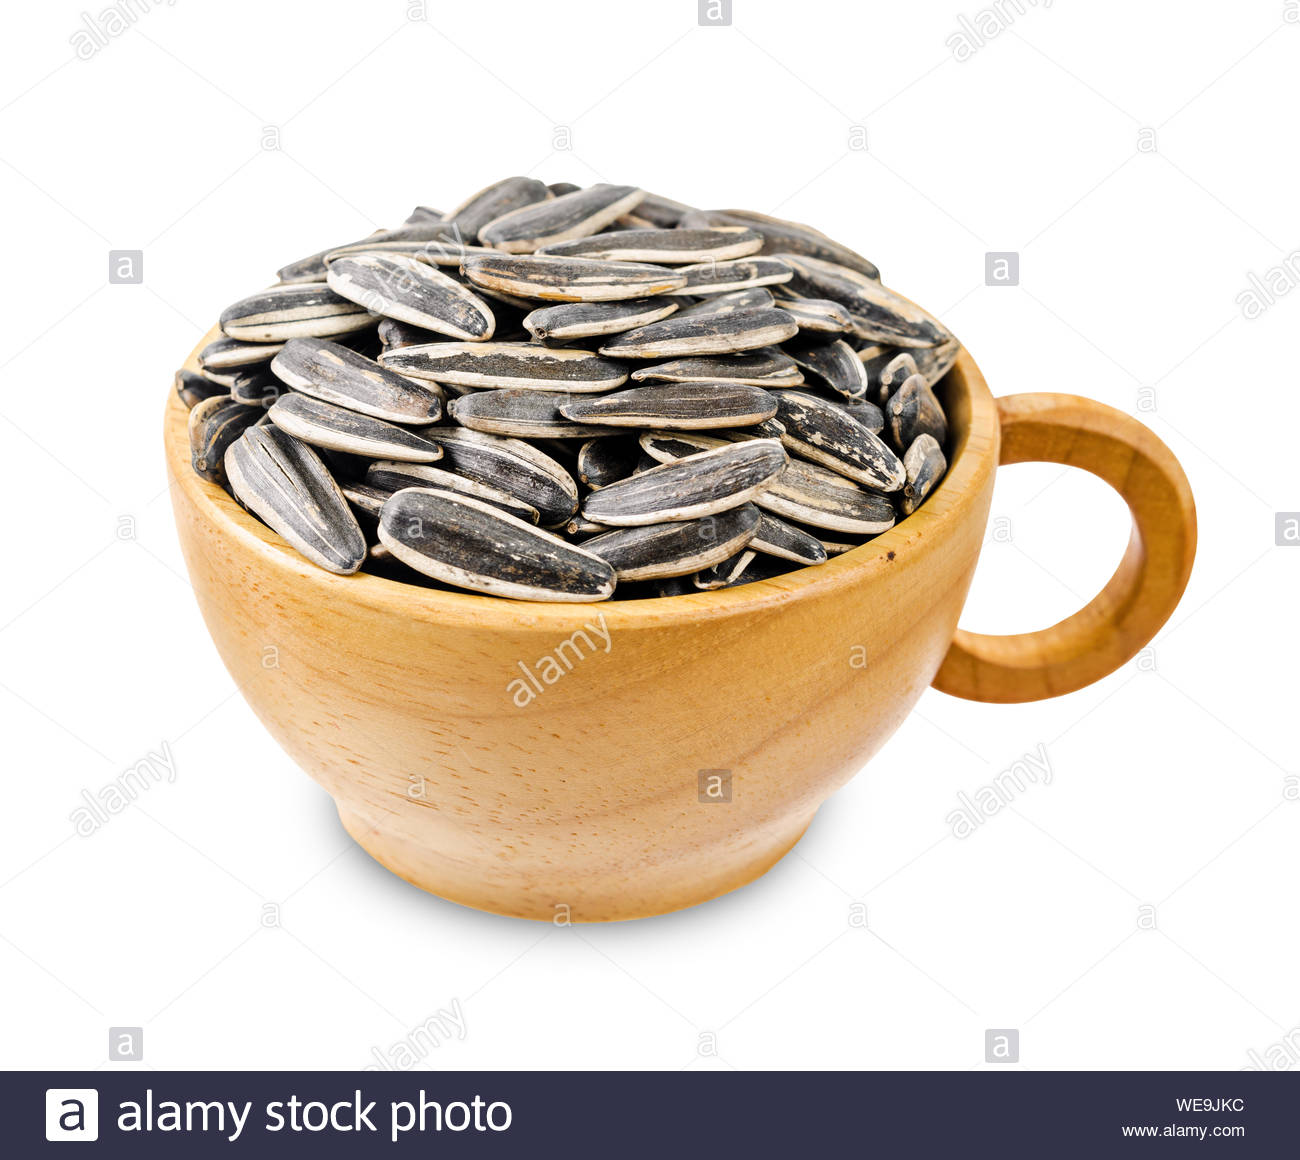 Dried Ripe Sunflower Seeds In Wooden Cup Isolated On White